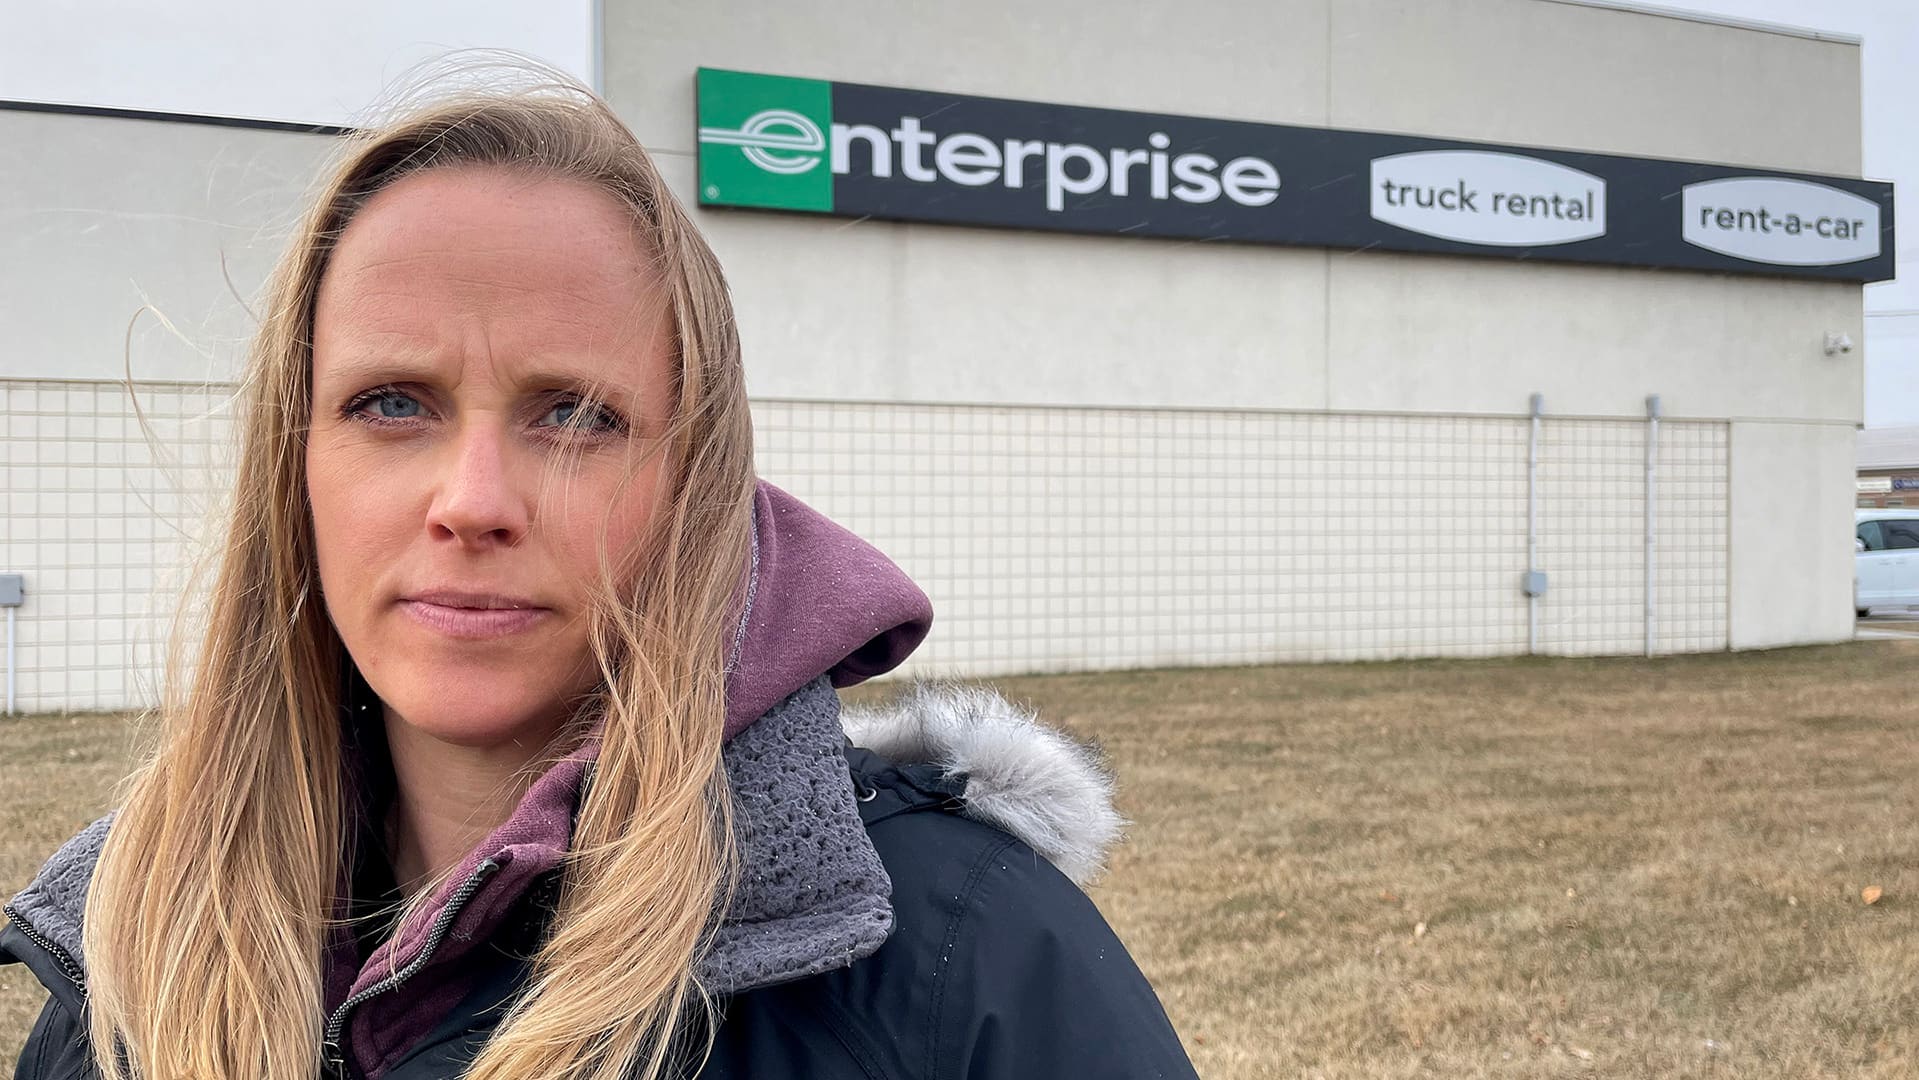 enterprise dings woman who rented truck on sunny day more than 5500 for hail damage 5